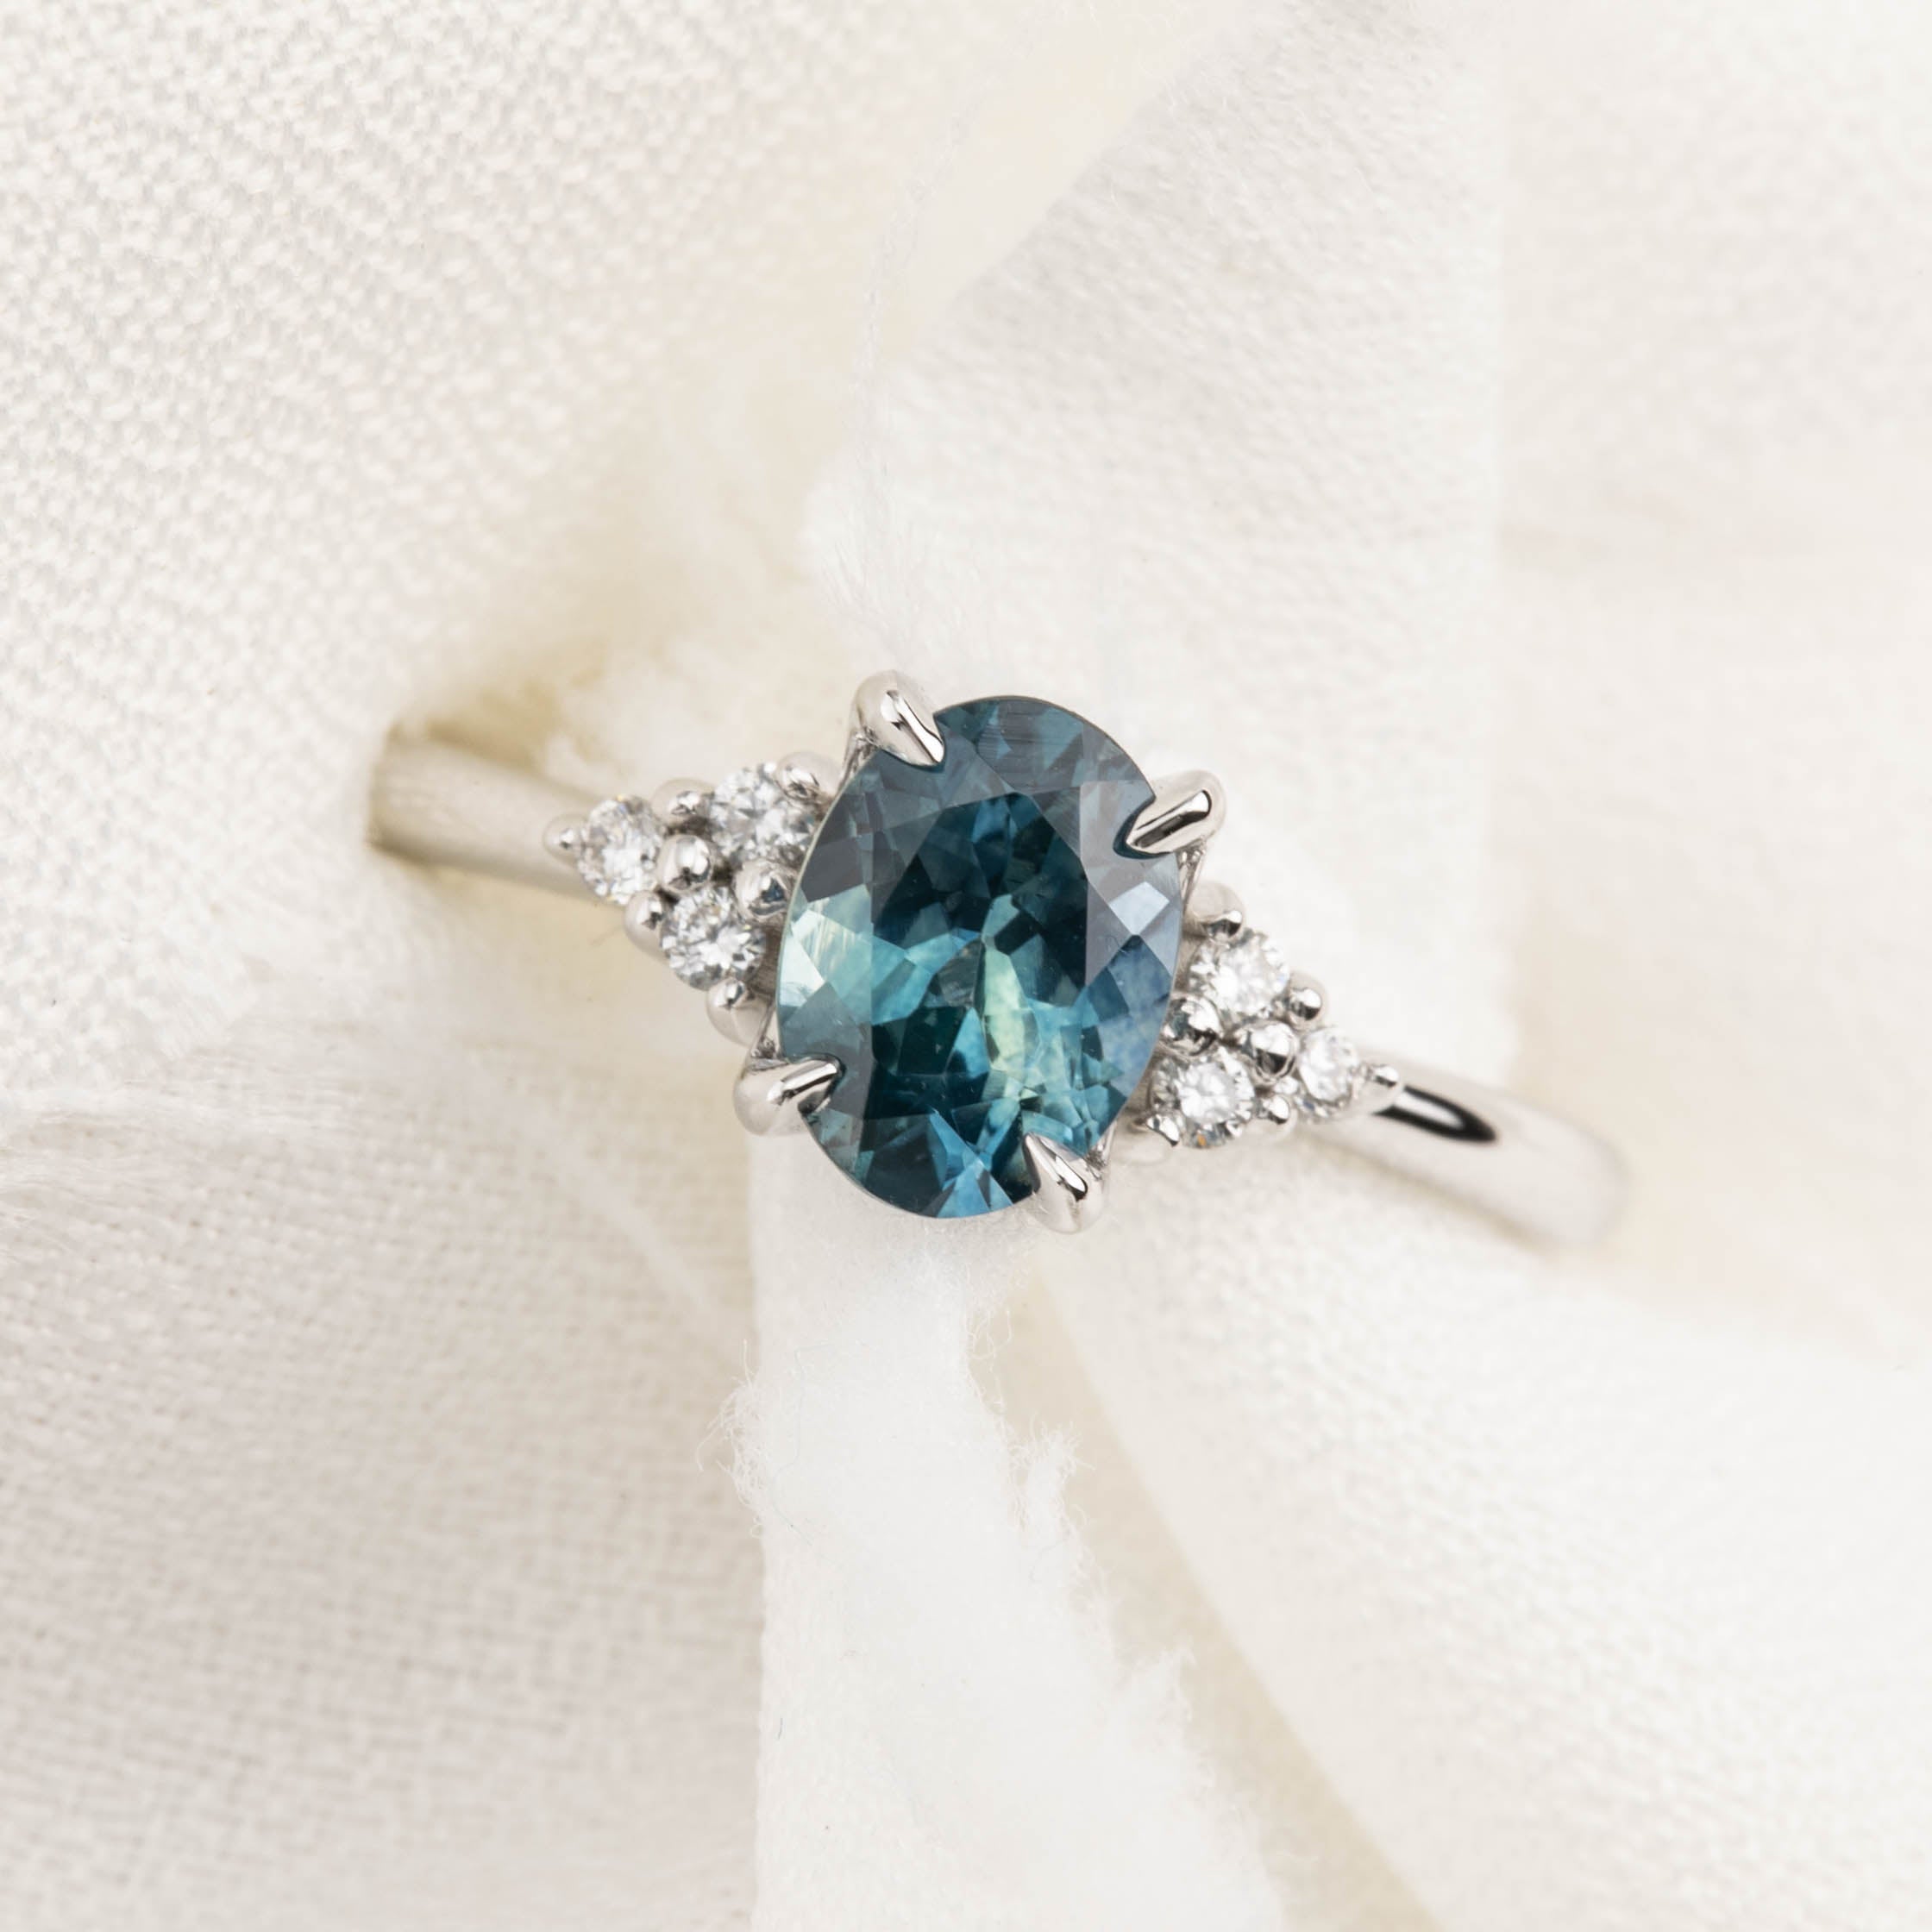 Teresa Ring 1.27ct Teal Blue Montana Sapphire, 14k White Gold (One of ...